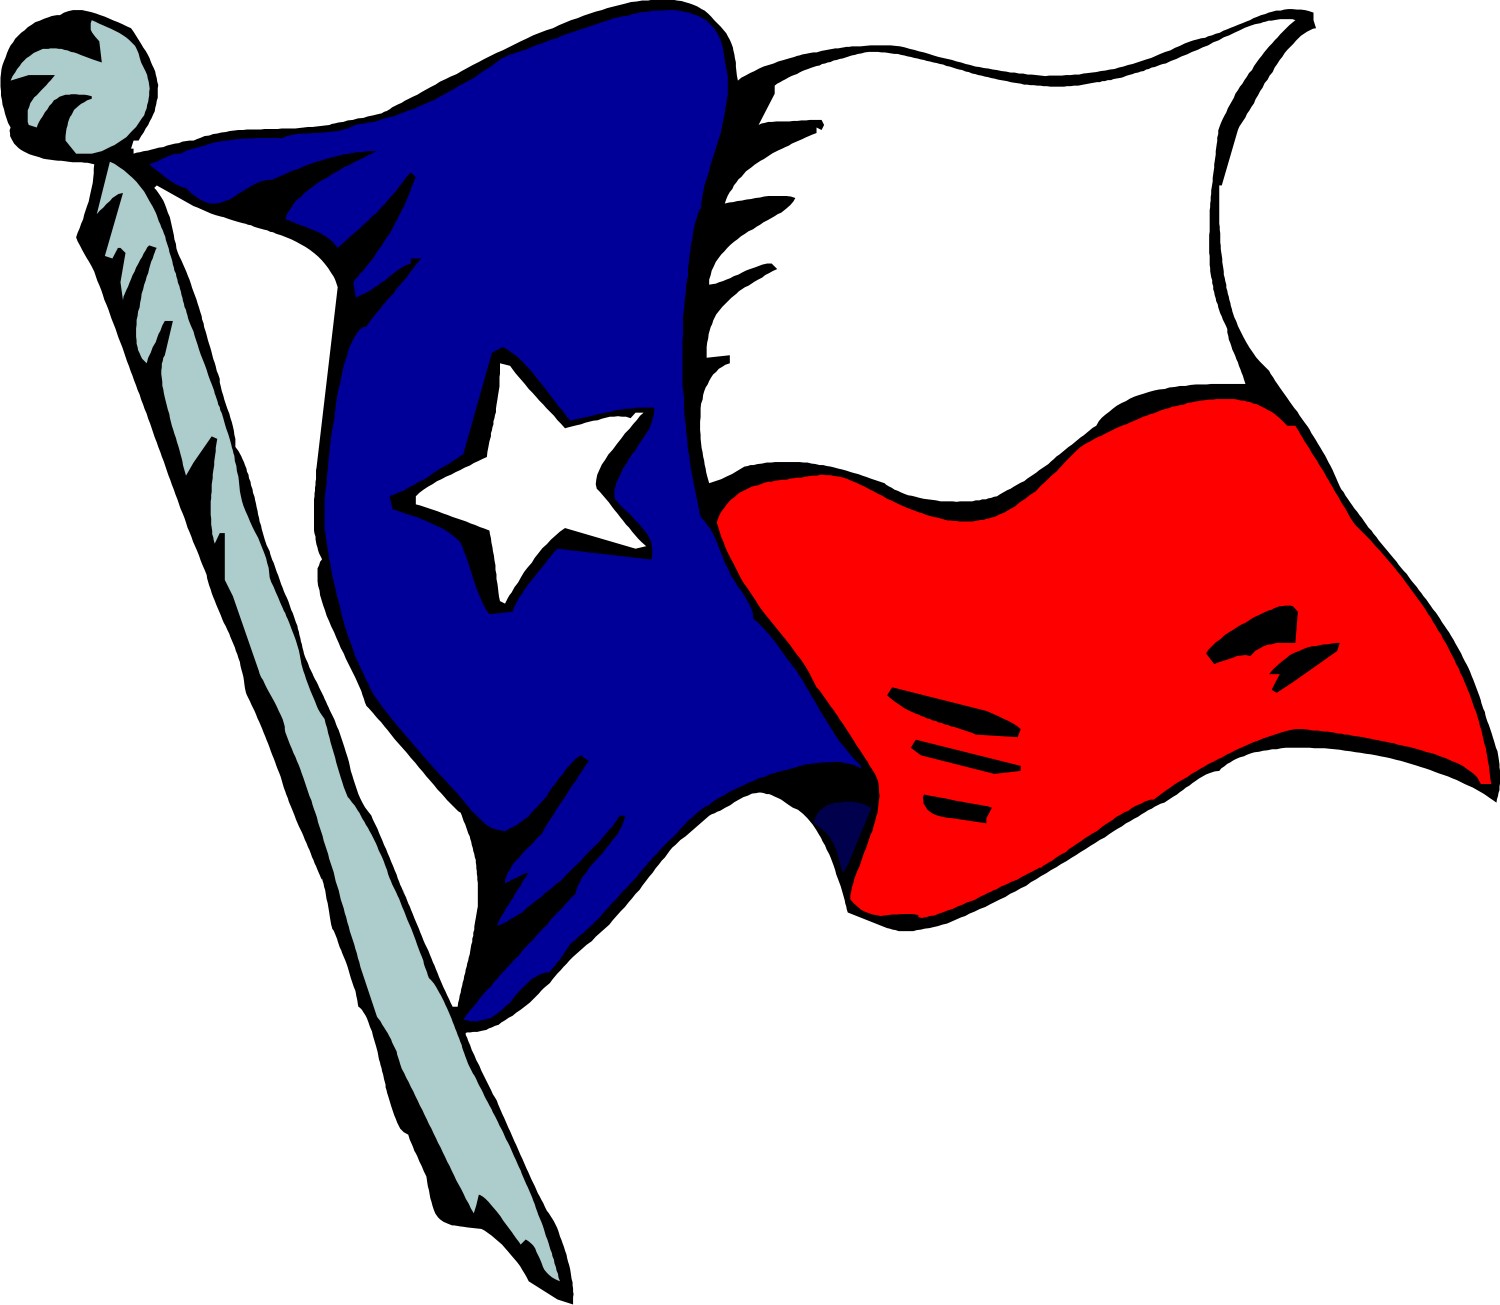 Texas 20clipart | Clipart Panda - Free Clipart Images